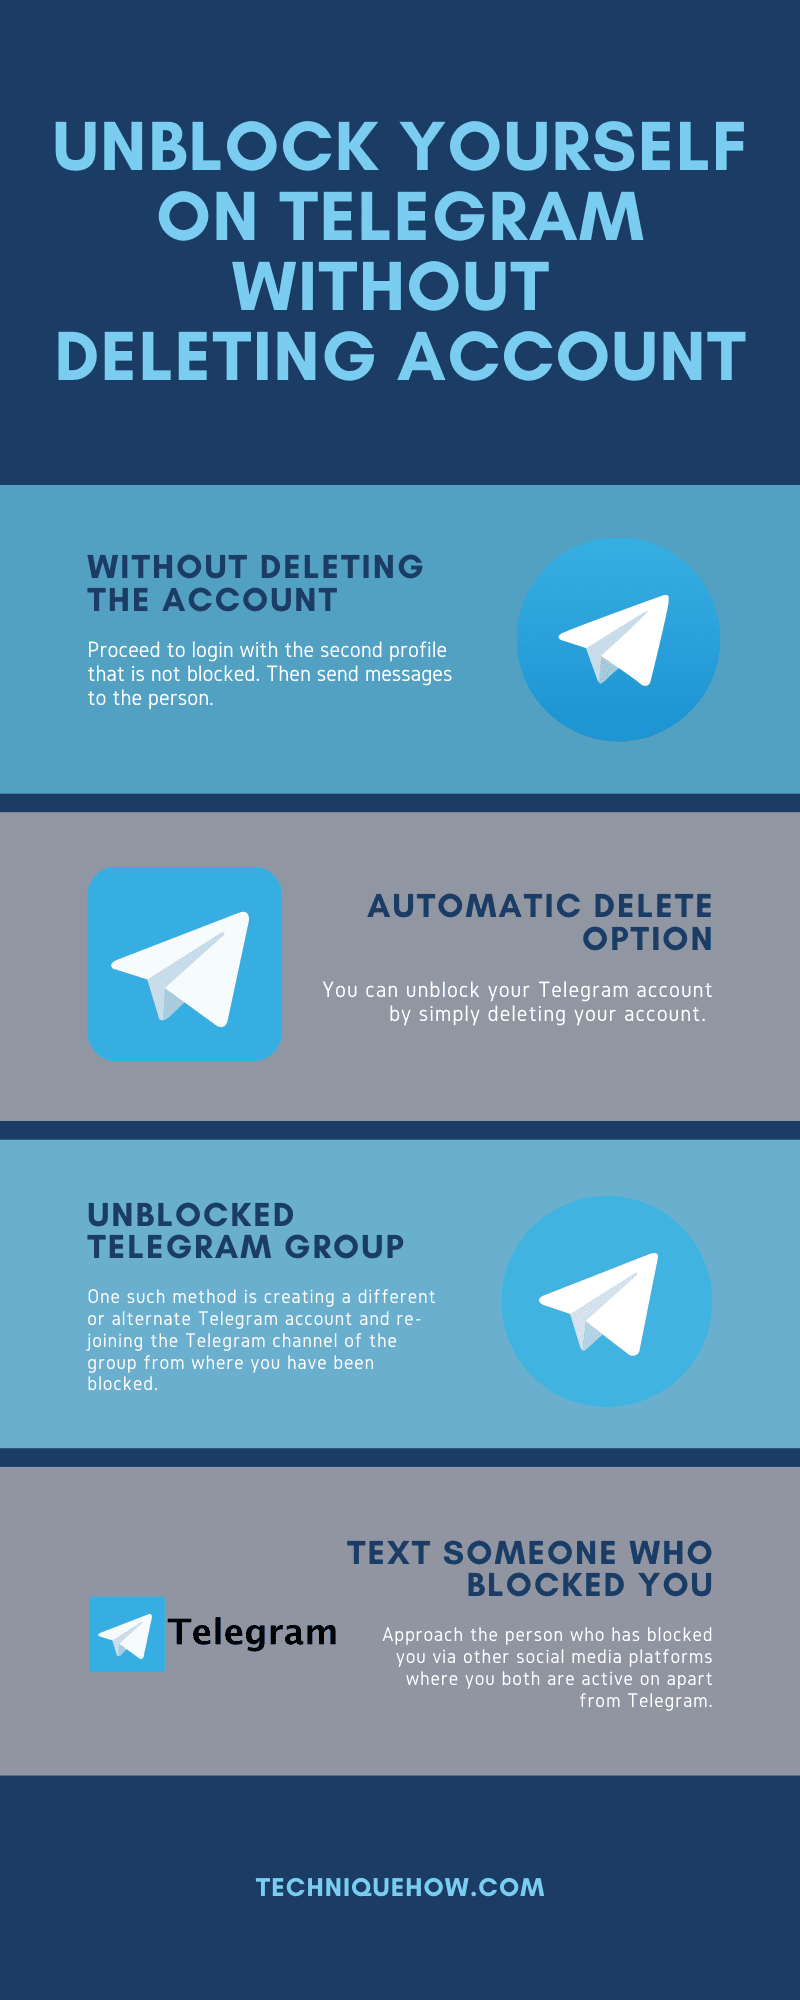 infographic_Unblock Yourself on Telegram without  Deleting Account